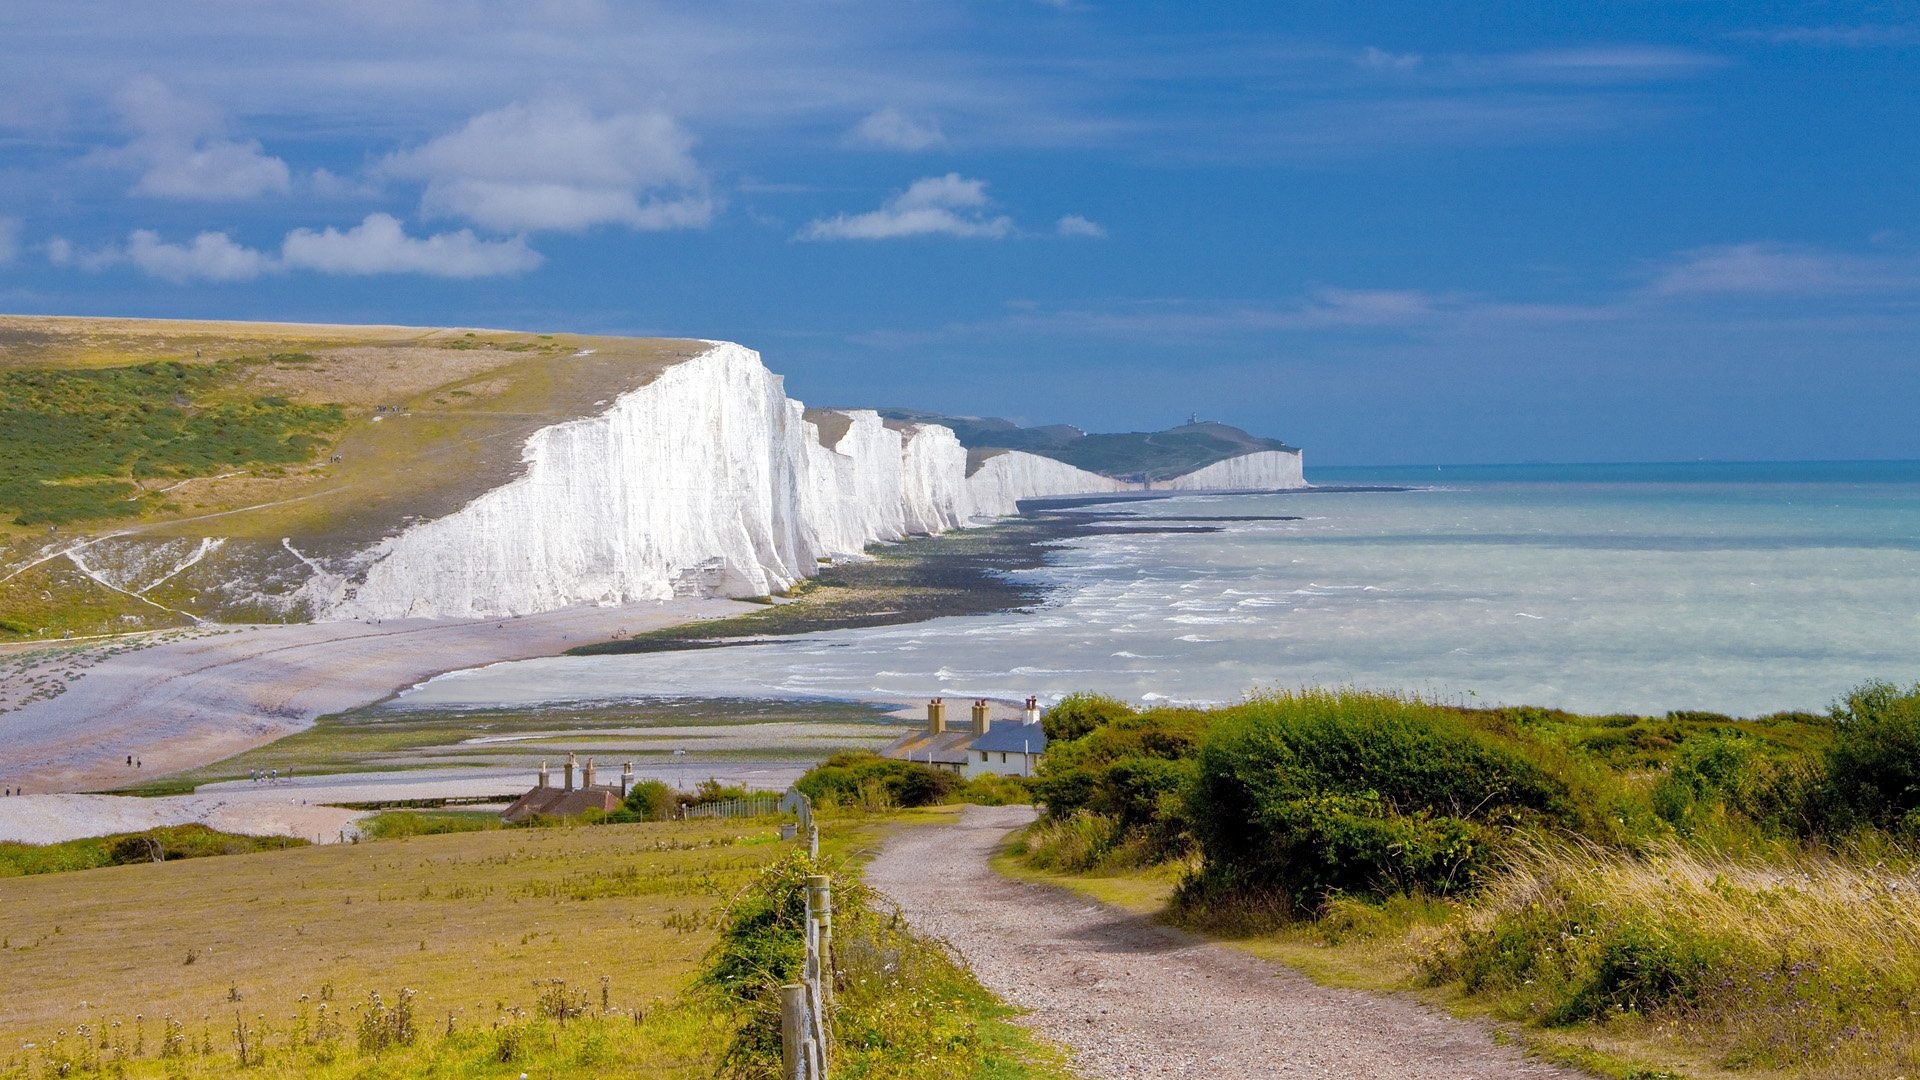 White Cliffs of Dover, HD wallpapers, Stunning landscapes, Natural beauty, 1920x1080 Full HD Desktop